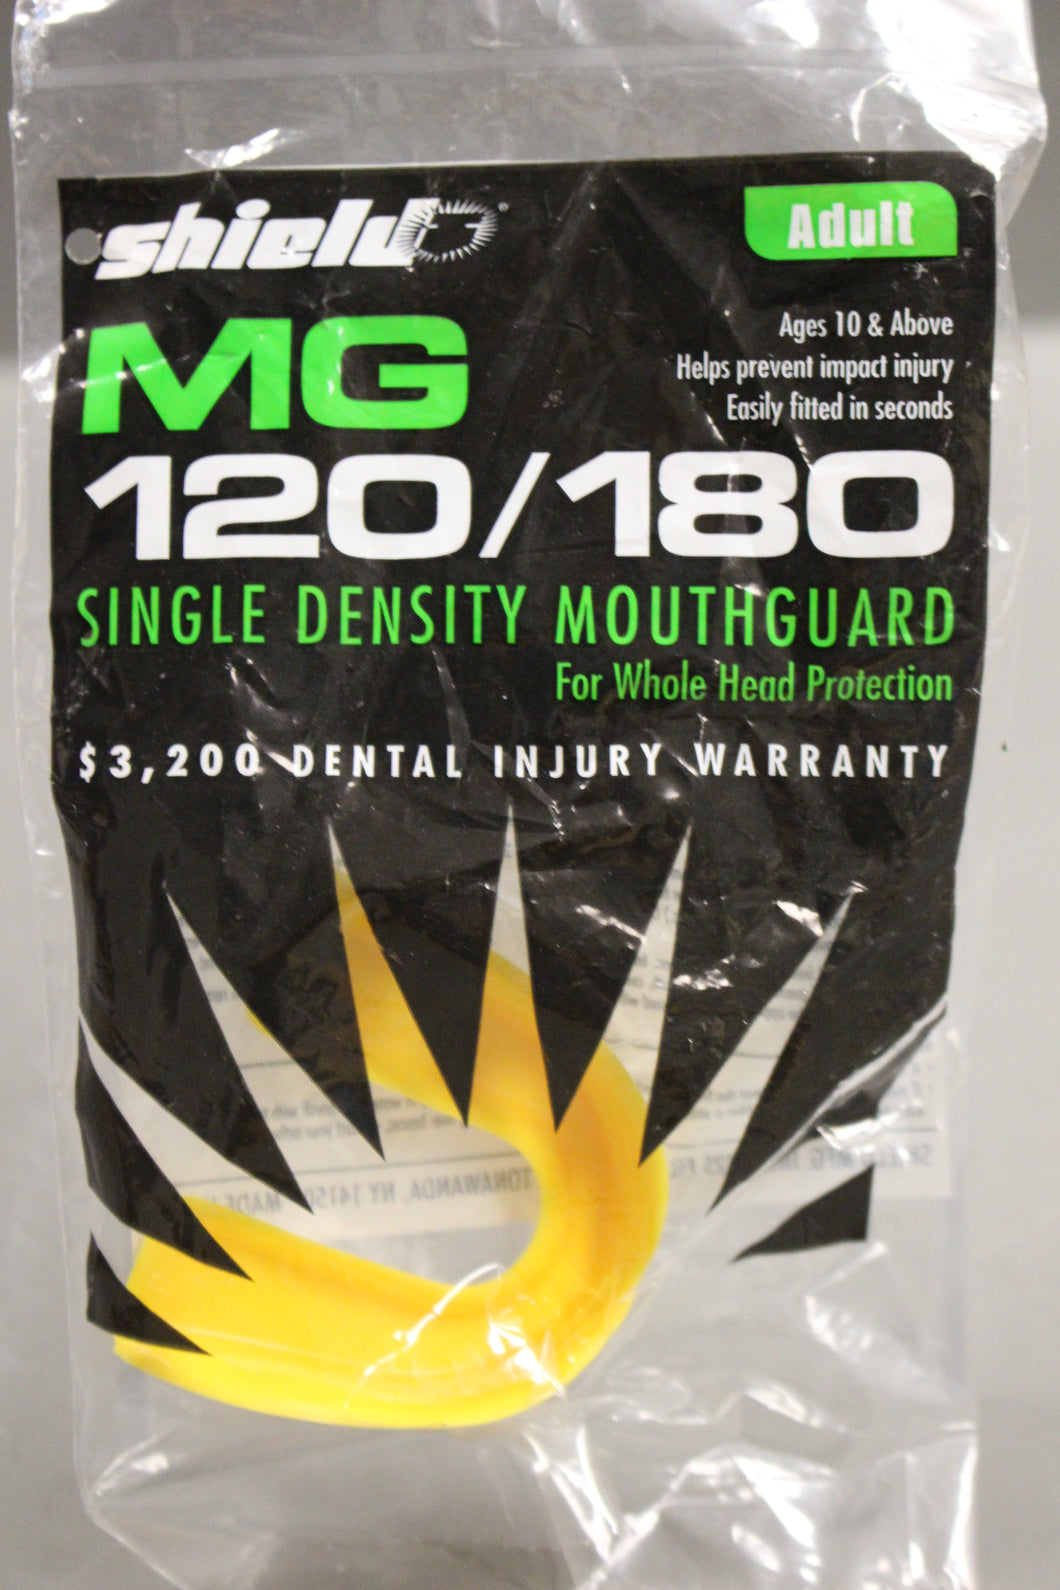 MG 120/180 Single Density Mouthguard for Whole Head Protection, Adult, New